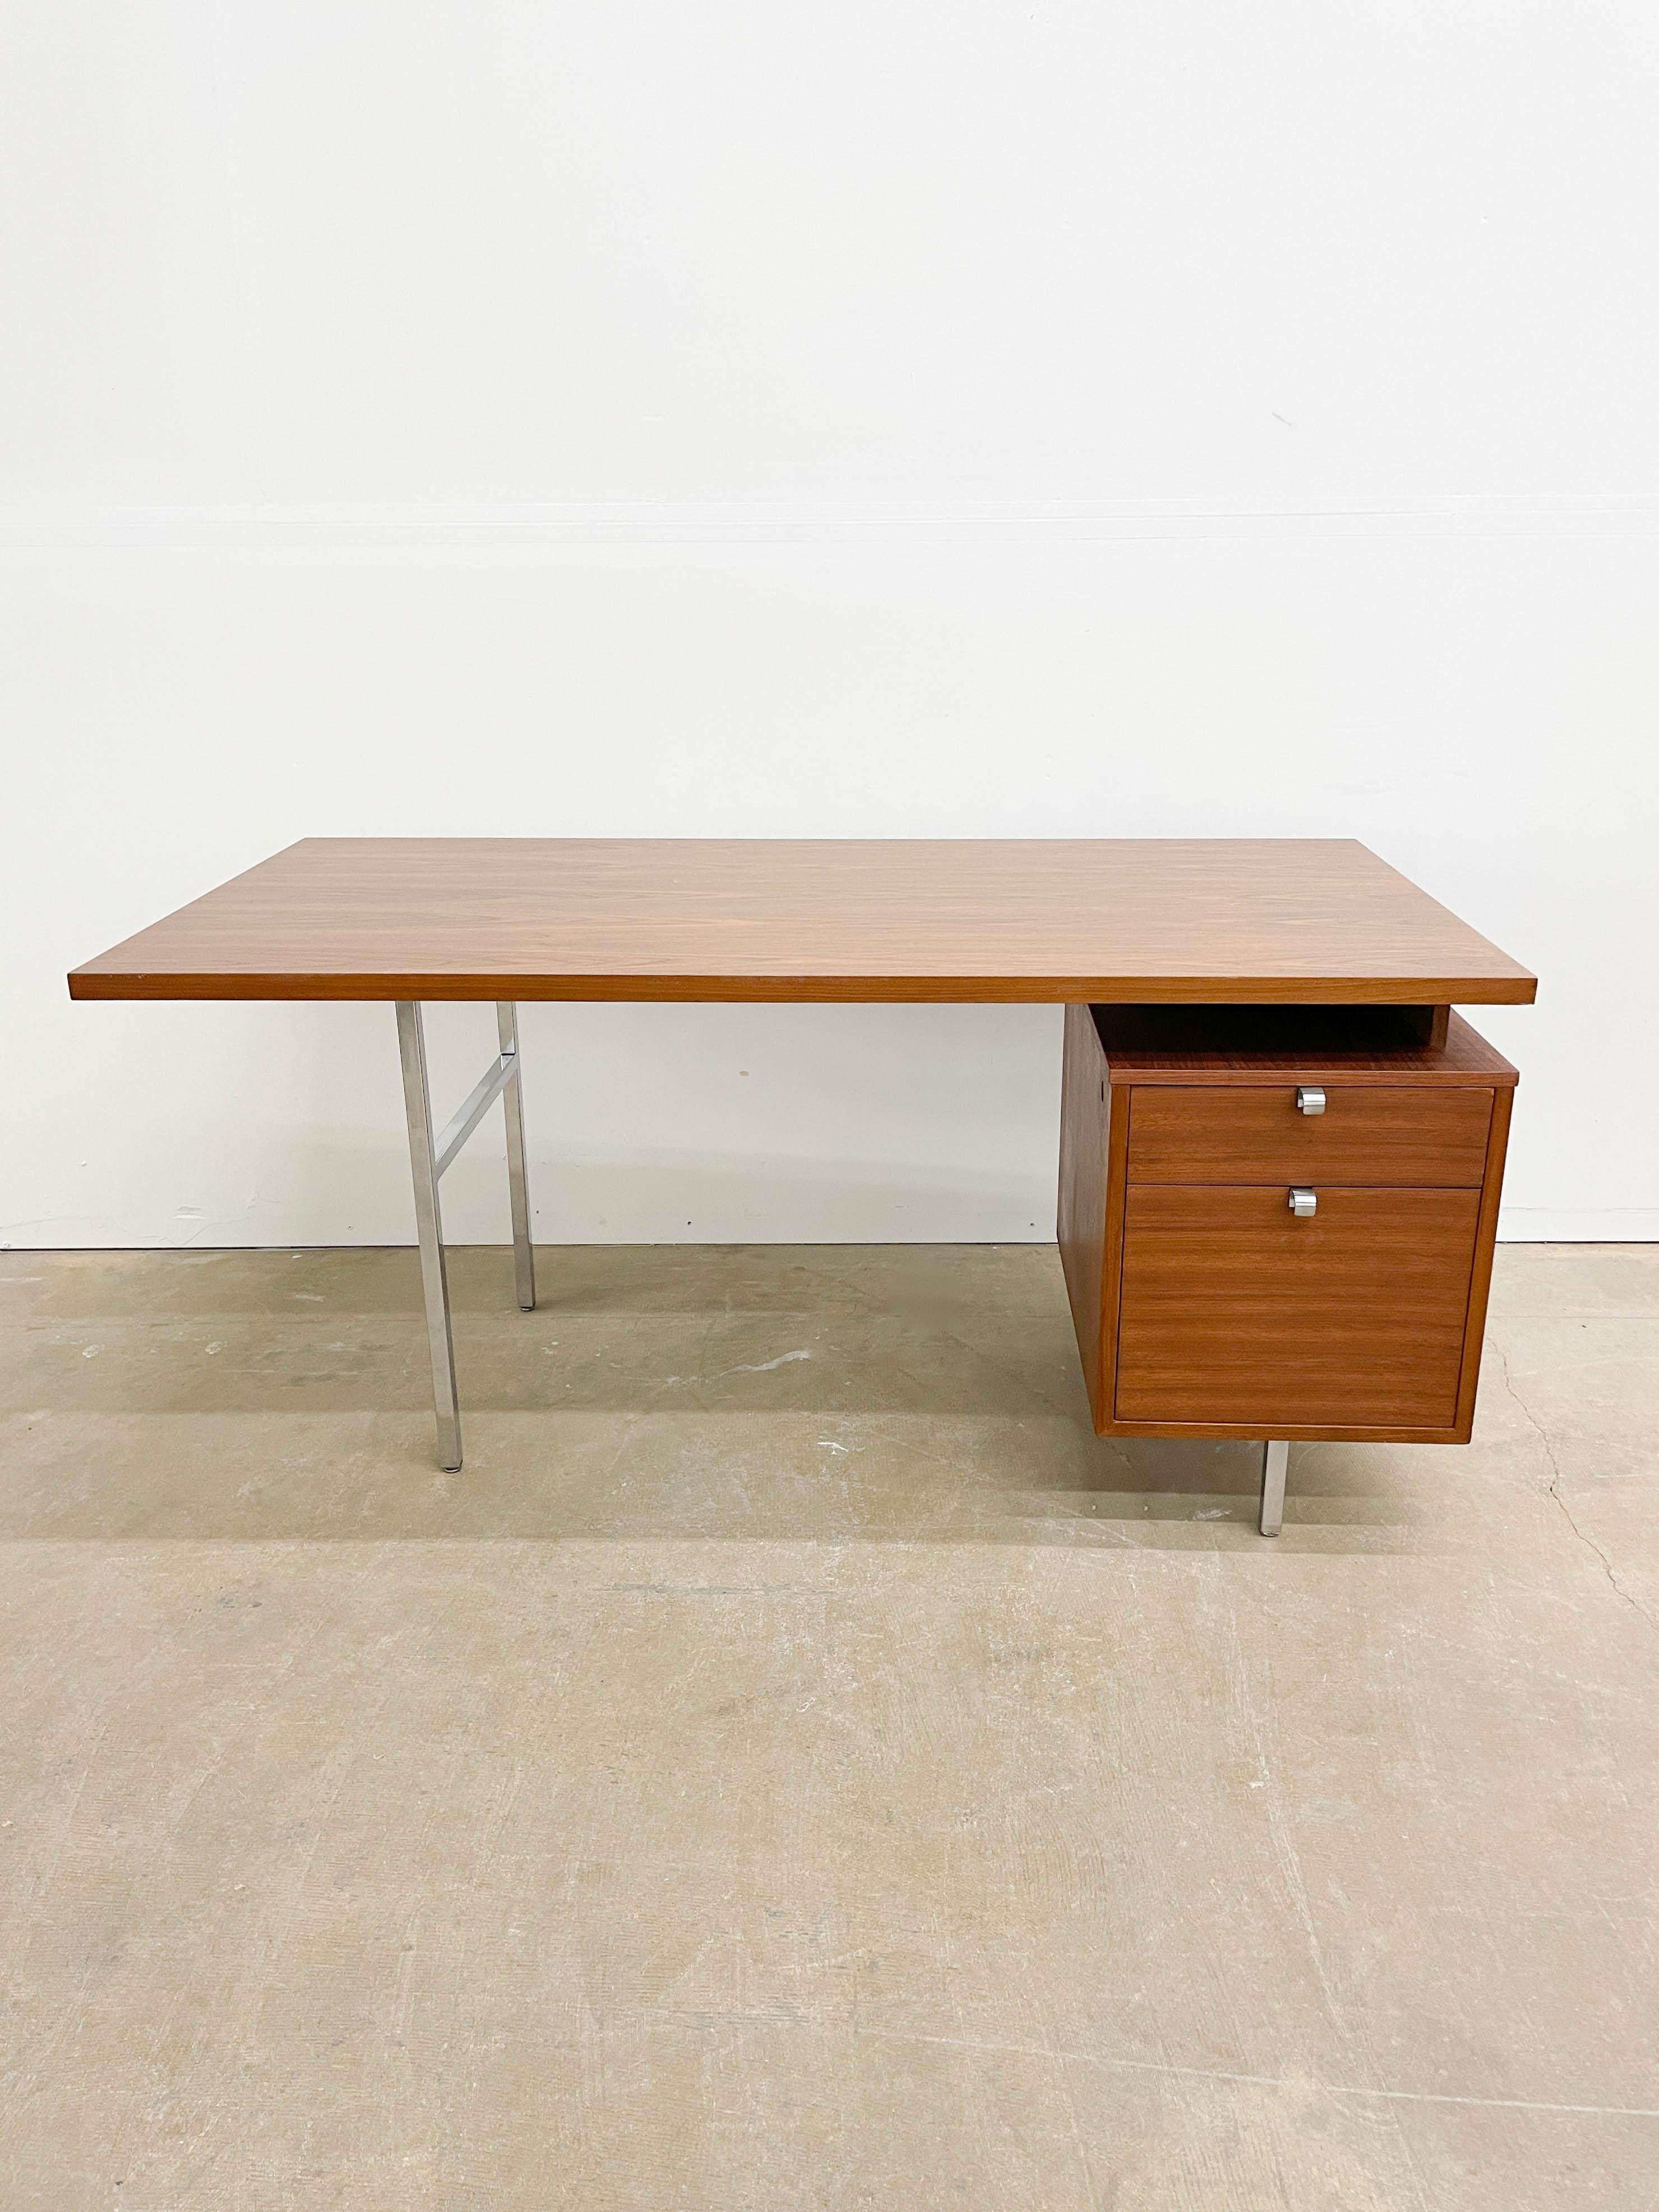 This is a beautiful 1950s desk designed by George Nelson for Herman Miller. As part of the Executive Office Group collection, the desk is an iconic part of mid-century modern design history. Crafted out of walnut, this desk boasts a floating top